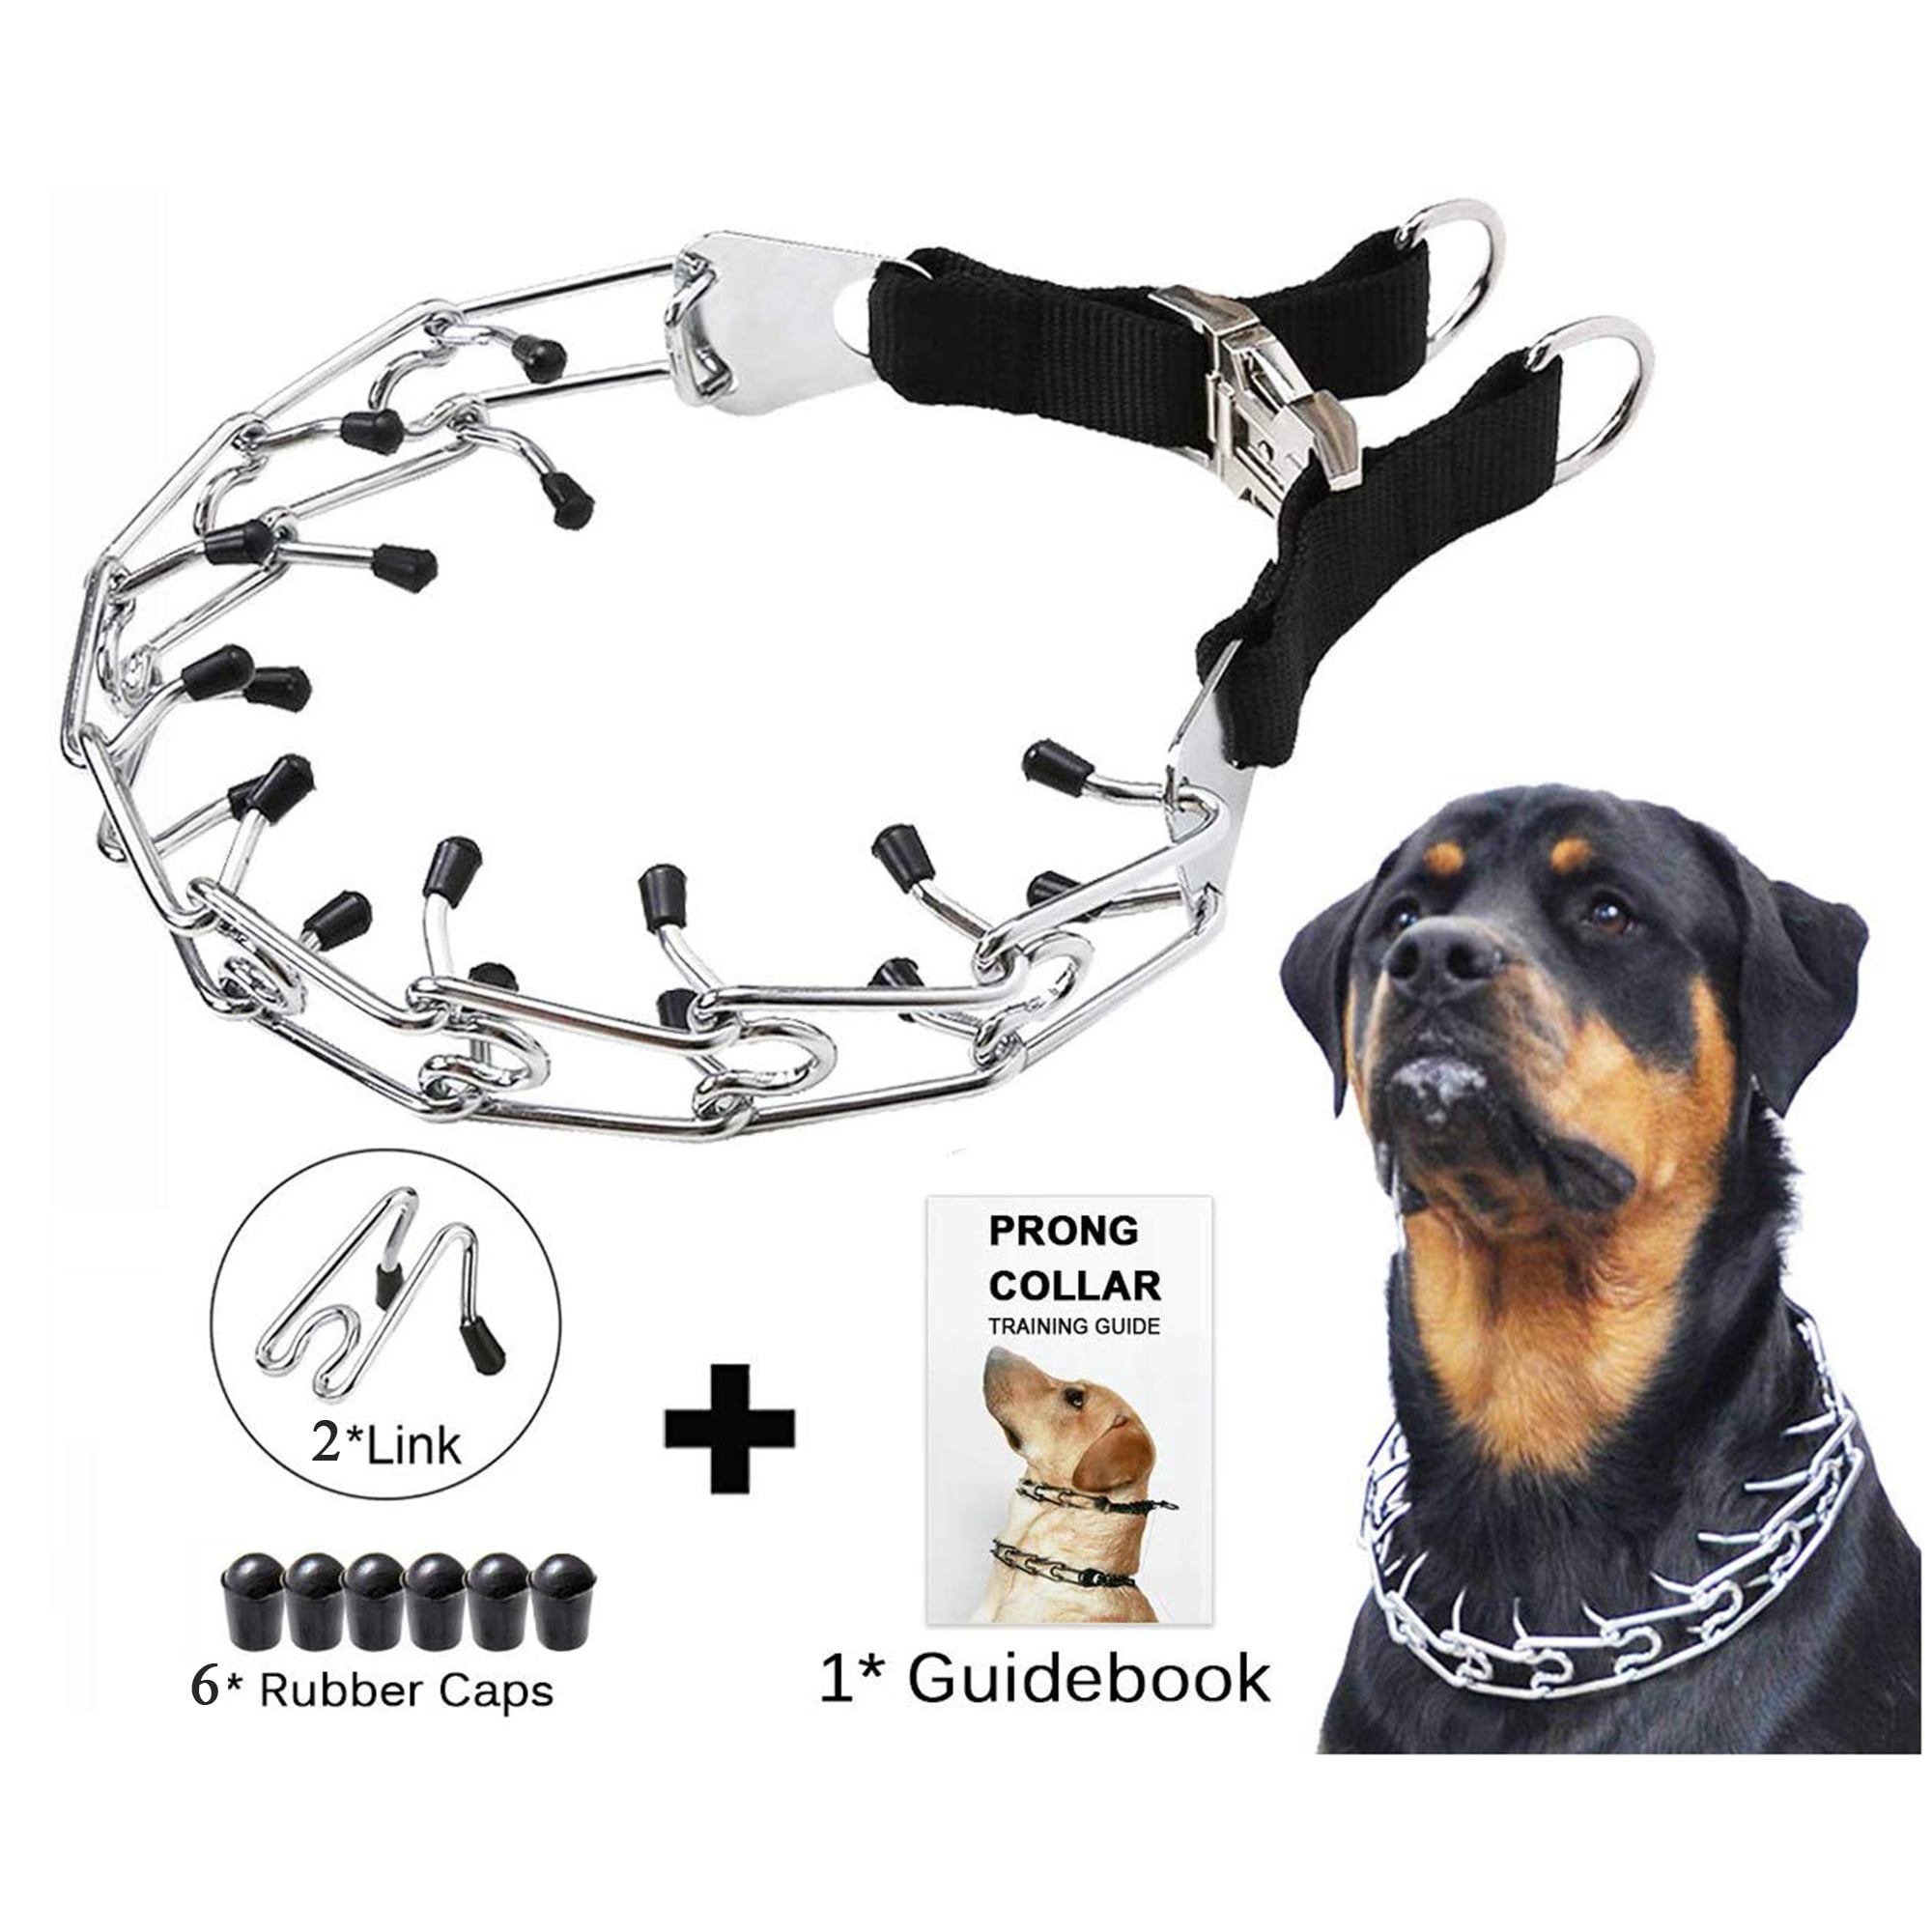 5 Classic Stainless Steel Choke Pinch Dog Chain Collar with Comfort Tips M-19.7, Silver Dog Prong Collar